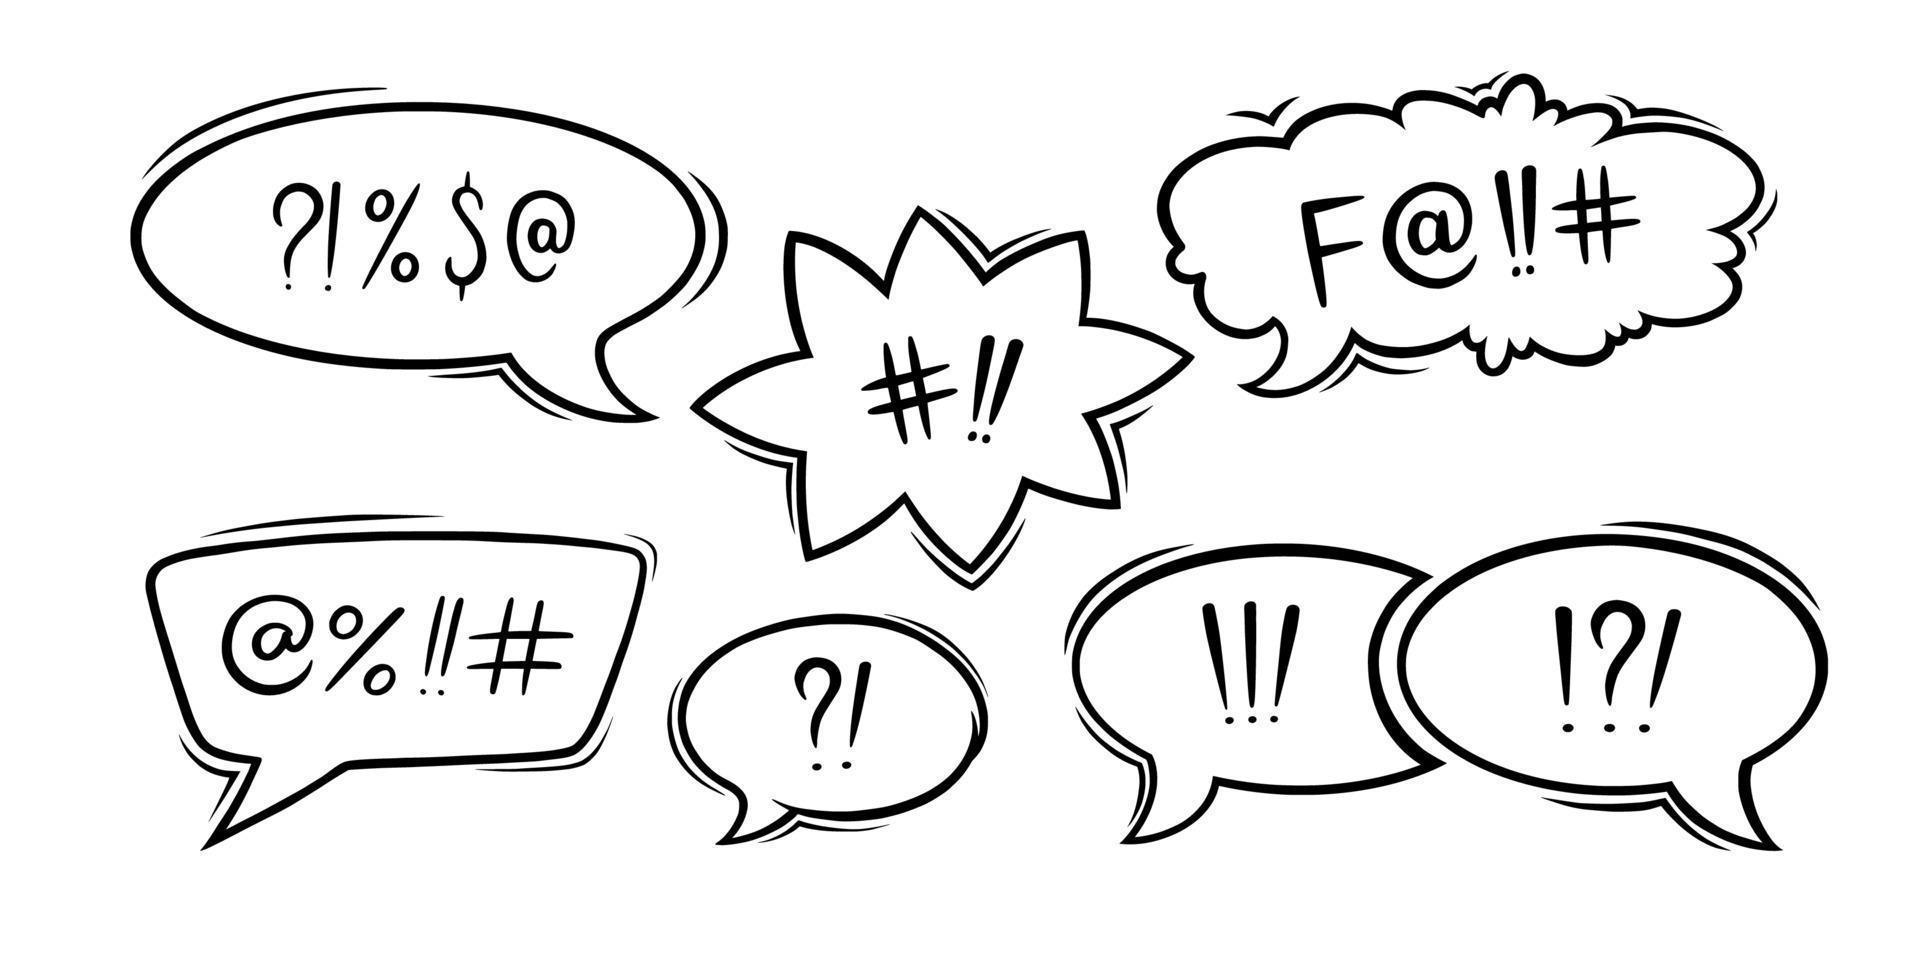 Swearing speech bubbles censored with symbols. Hand drawn swear words in text bubbles to express exclamation and harsh mood. Vector illustration